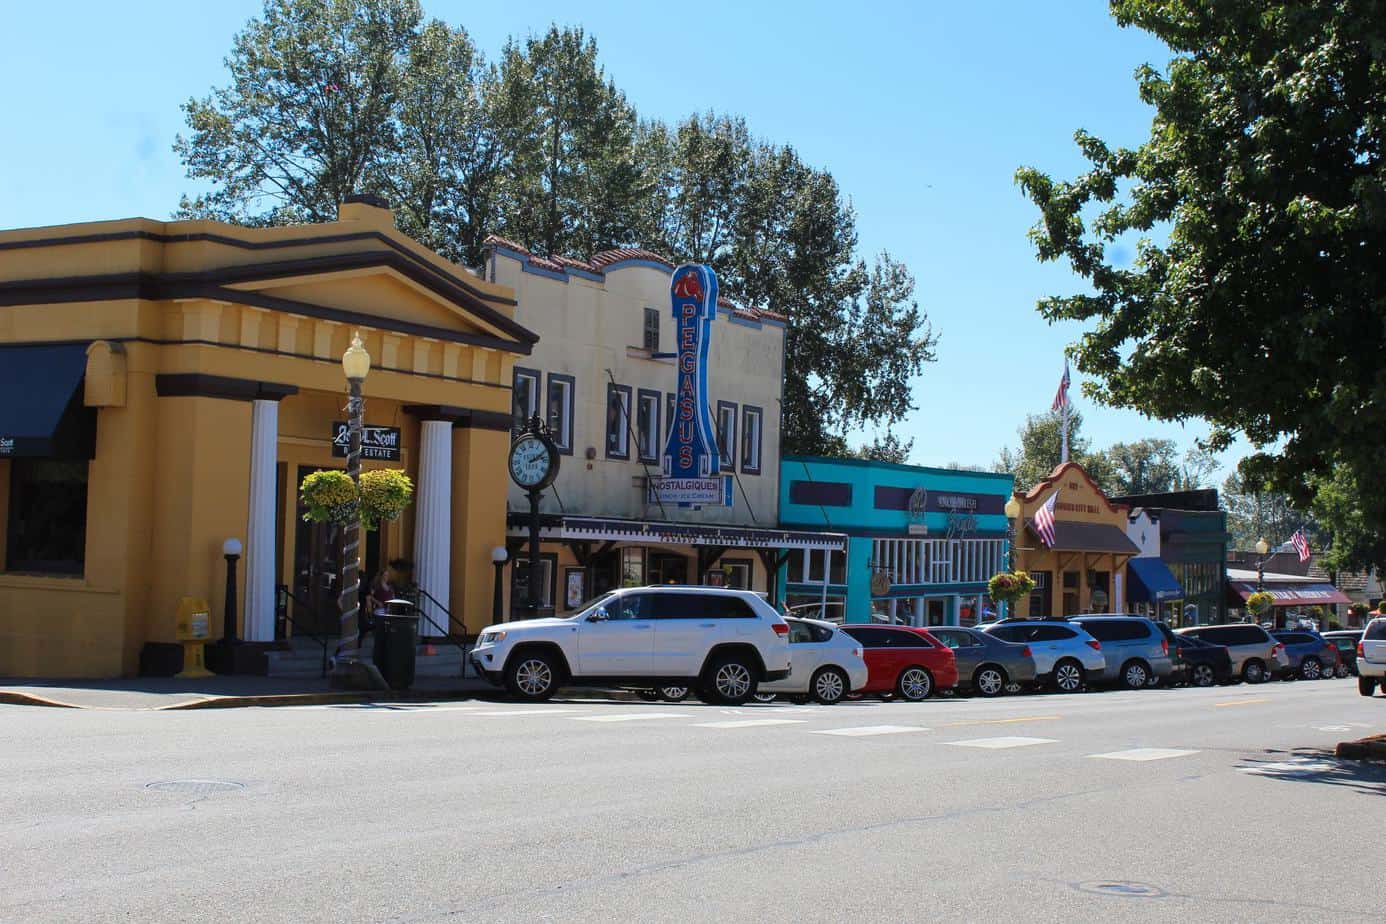 Several charming buildings lining the street of Snohomish